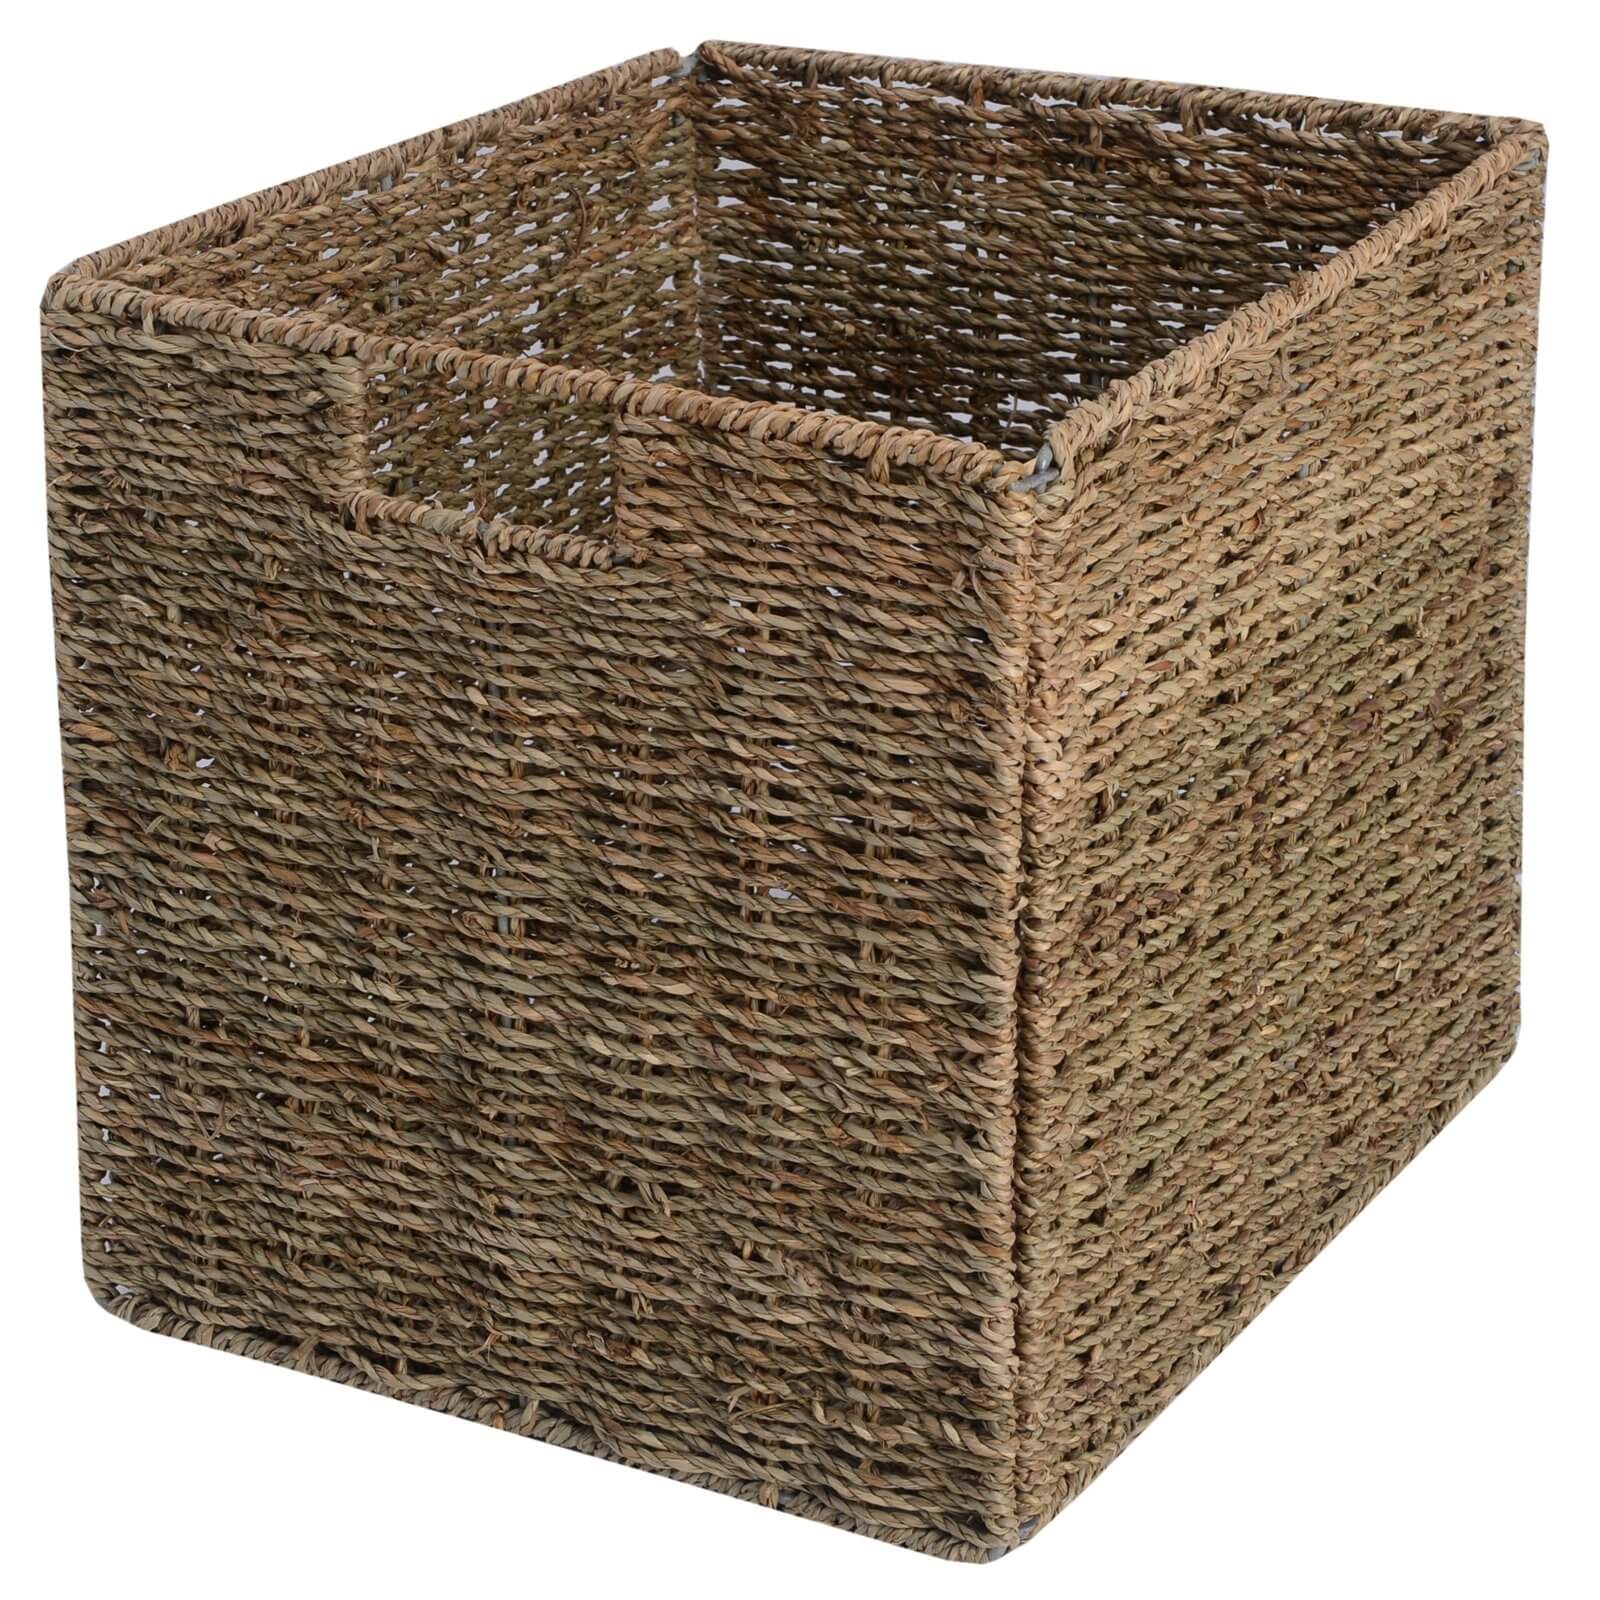 Clever Cube Seagrass Insert - Natural